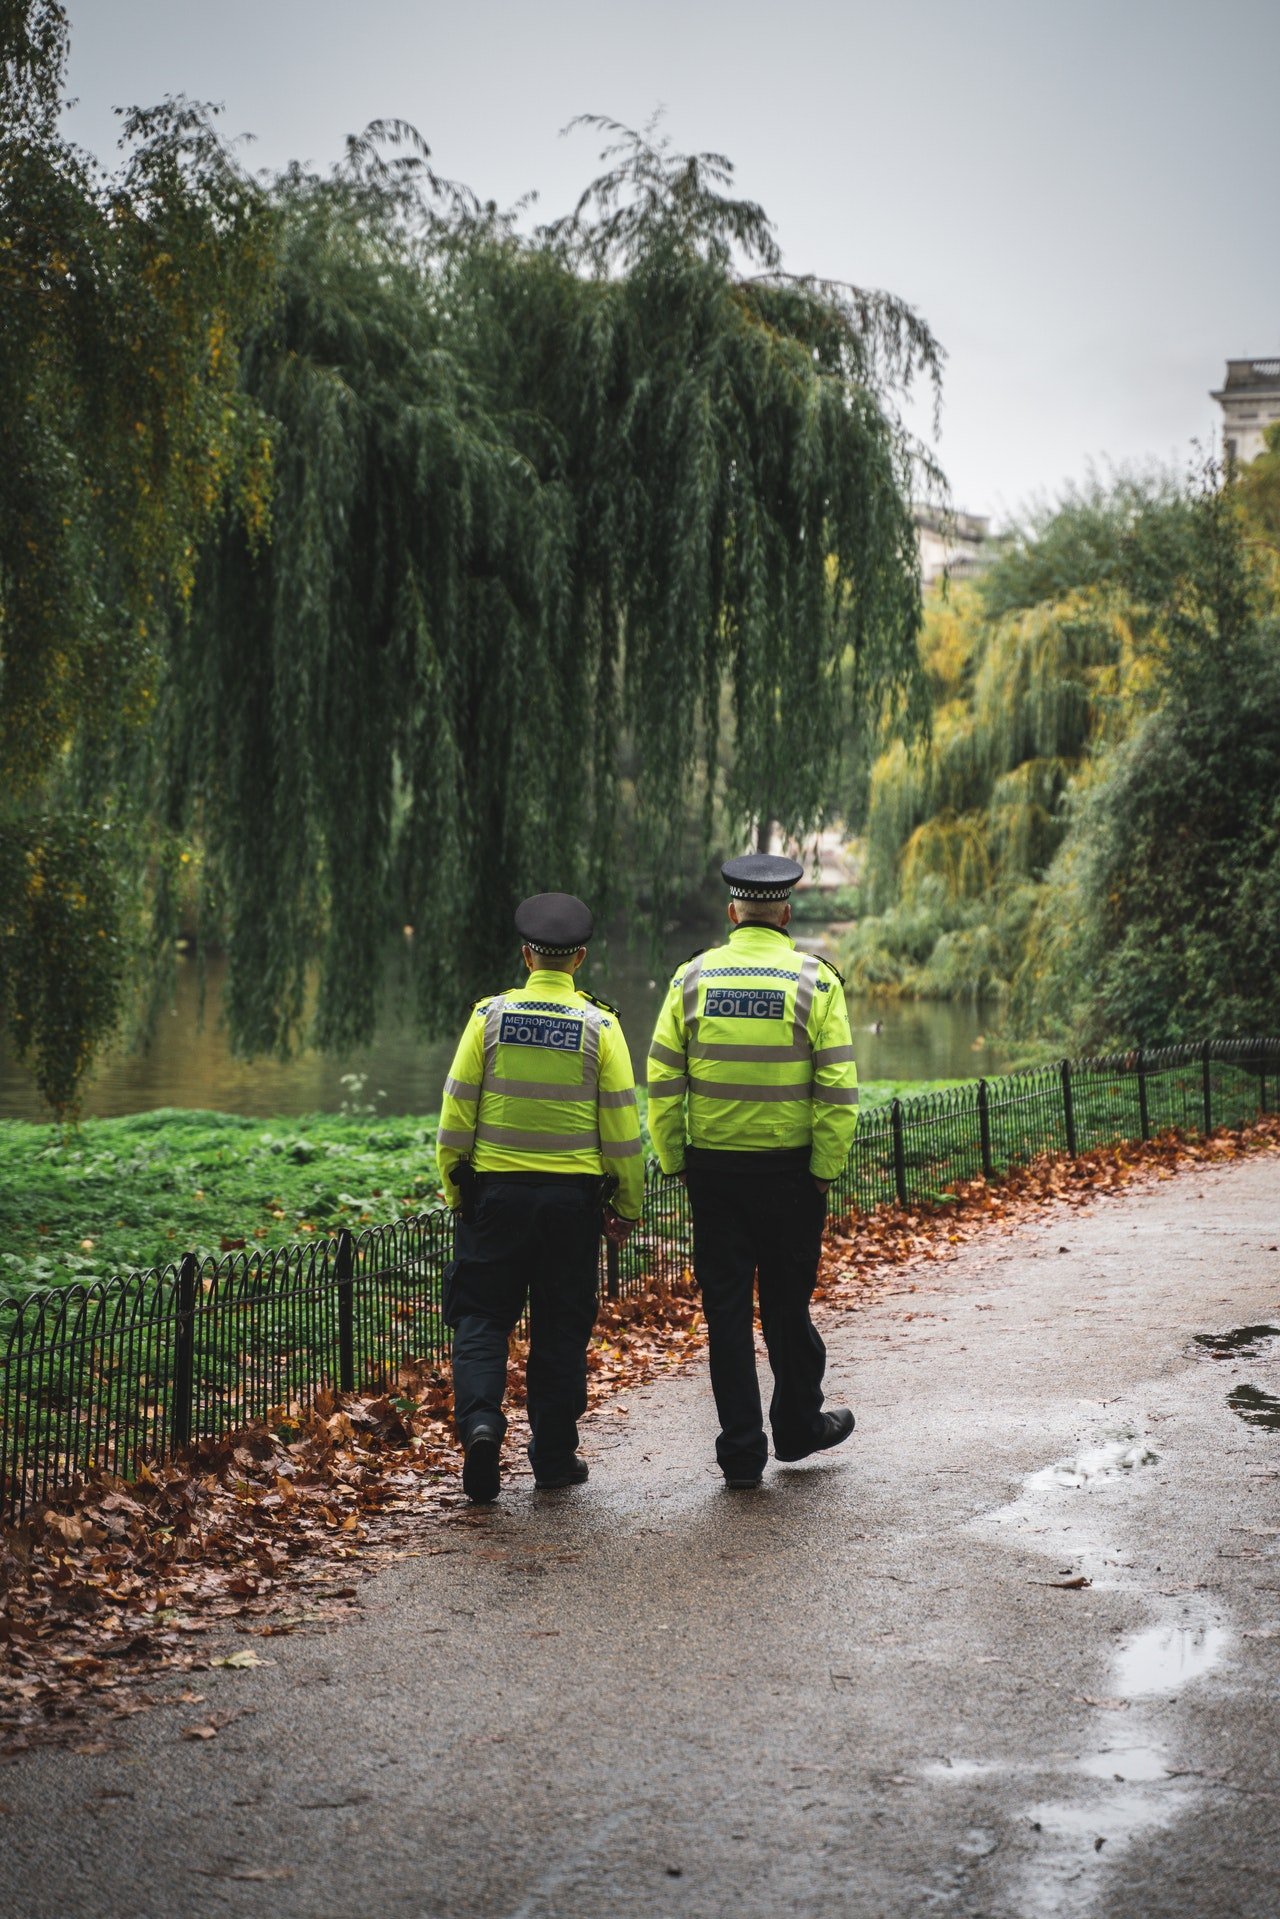 Two police offficers walking down the road | Photo: Pexels